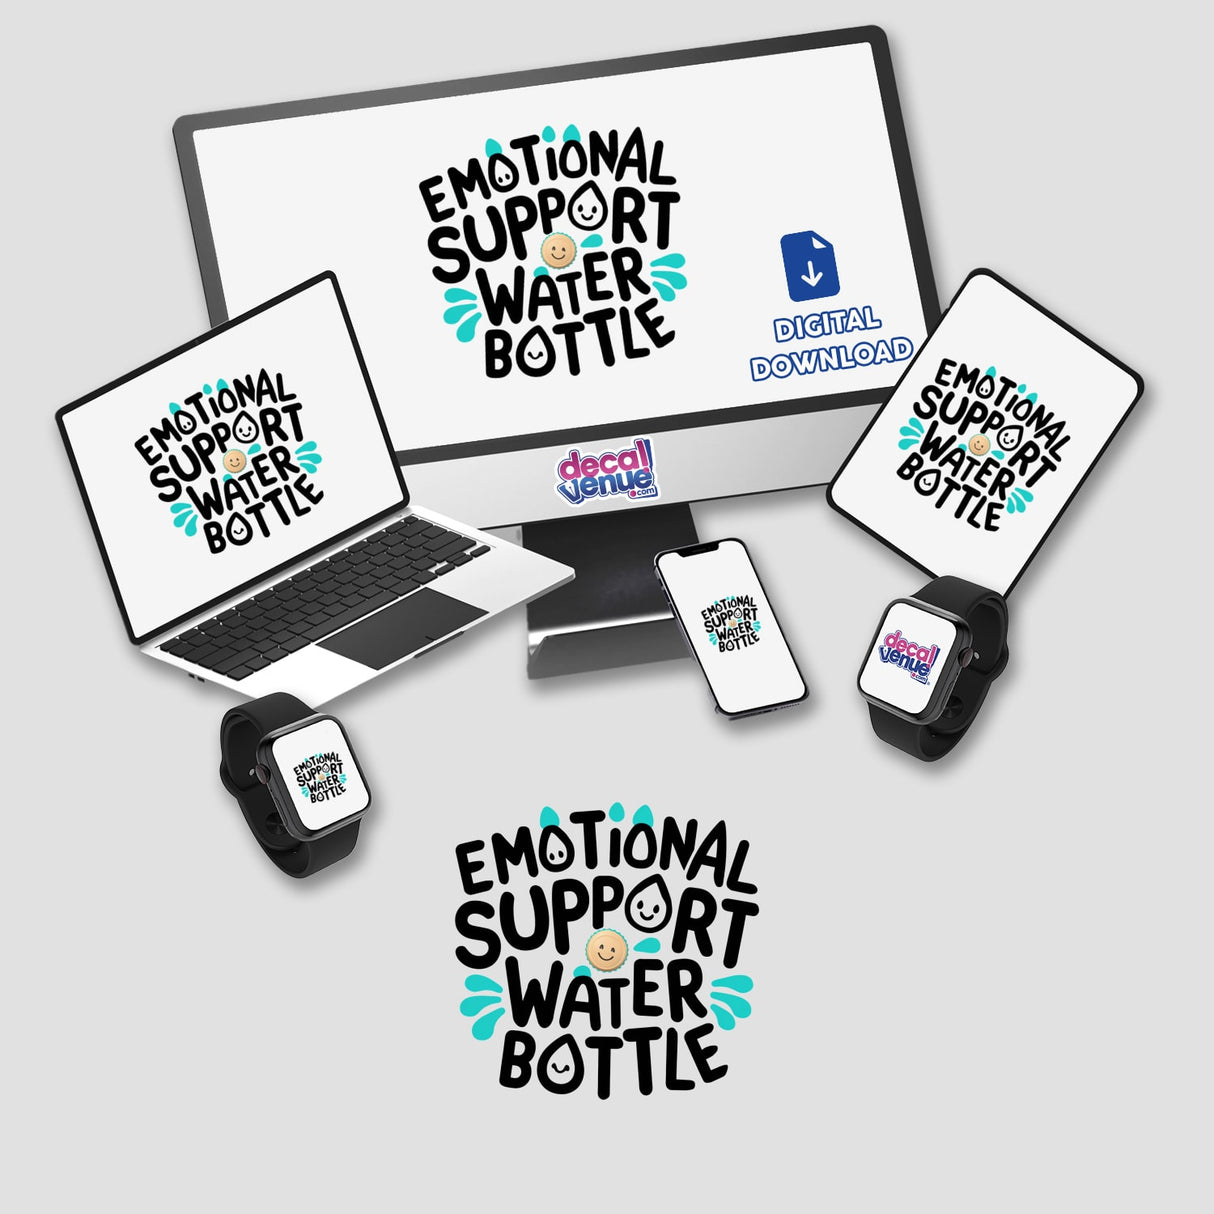 Colorful digital artwork featuring an "Emotional Support Water Bottle" design displayed across various digital devices, including a laptop, smartphone, and smartwatch. The design incorporates playful typography and graphics, showcasing the whimsical nature of this unique digital product.